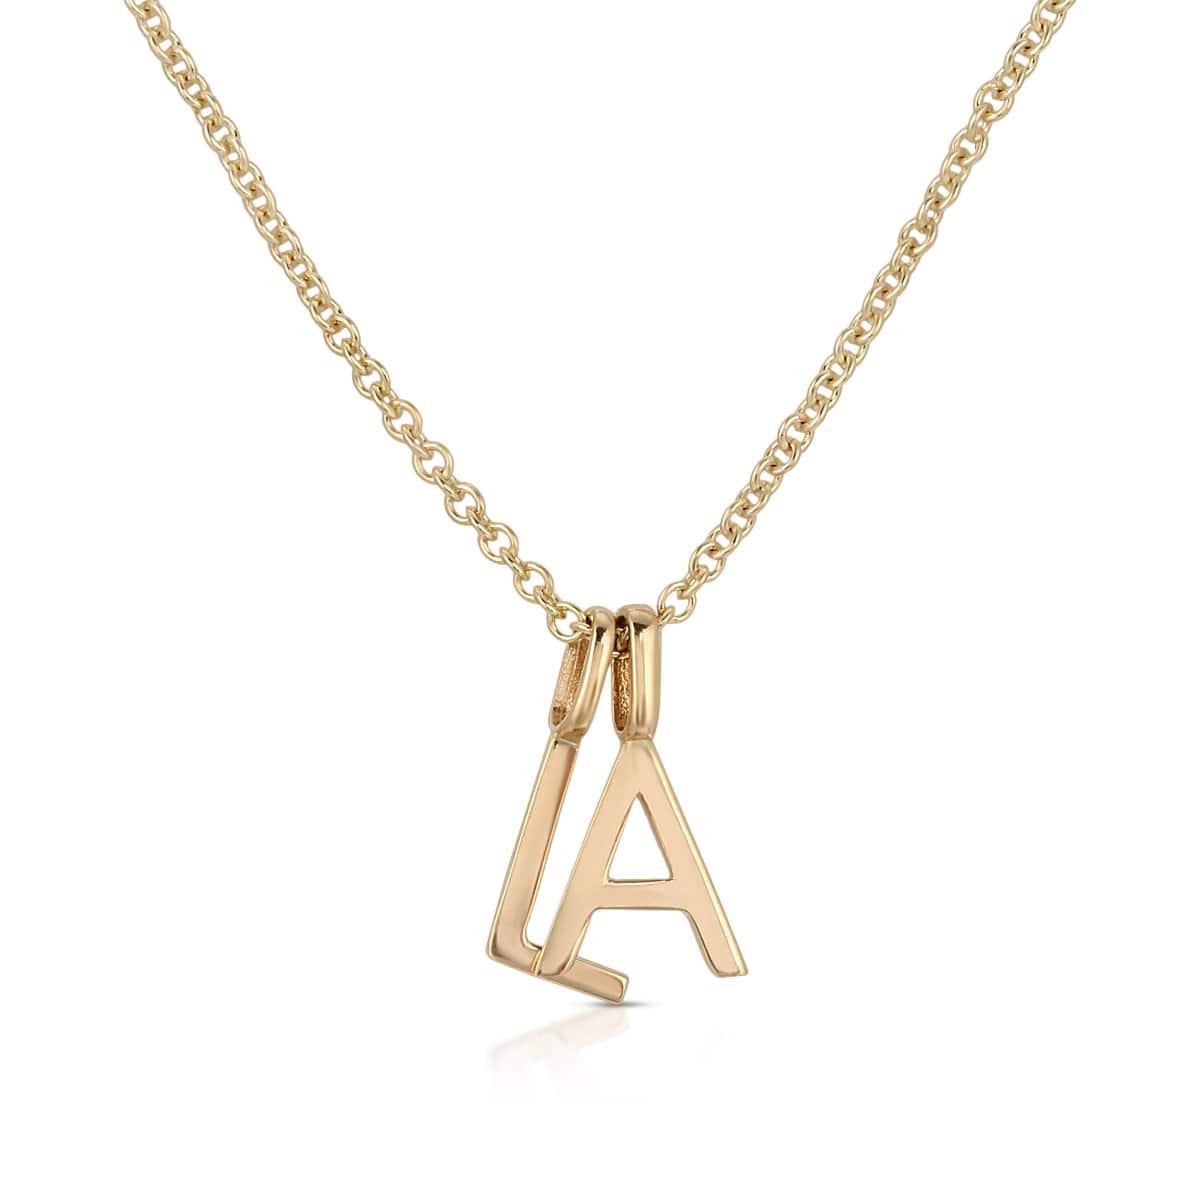 LA Letter charms layered on chain 